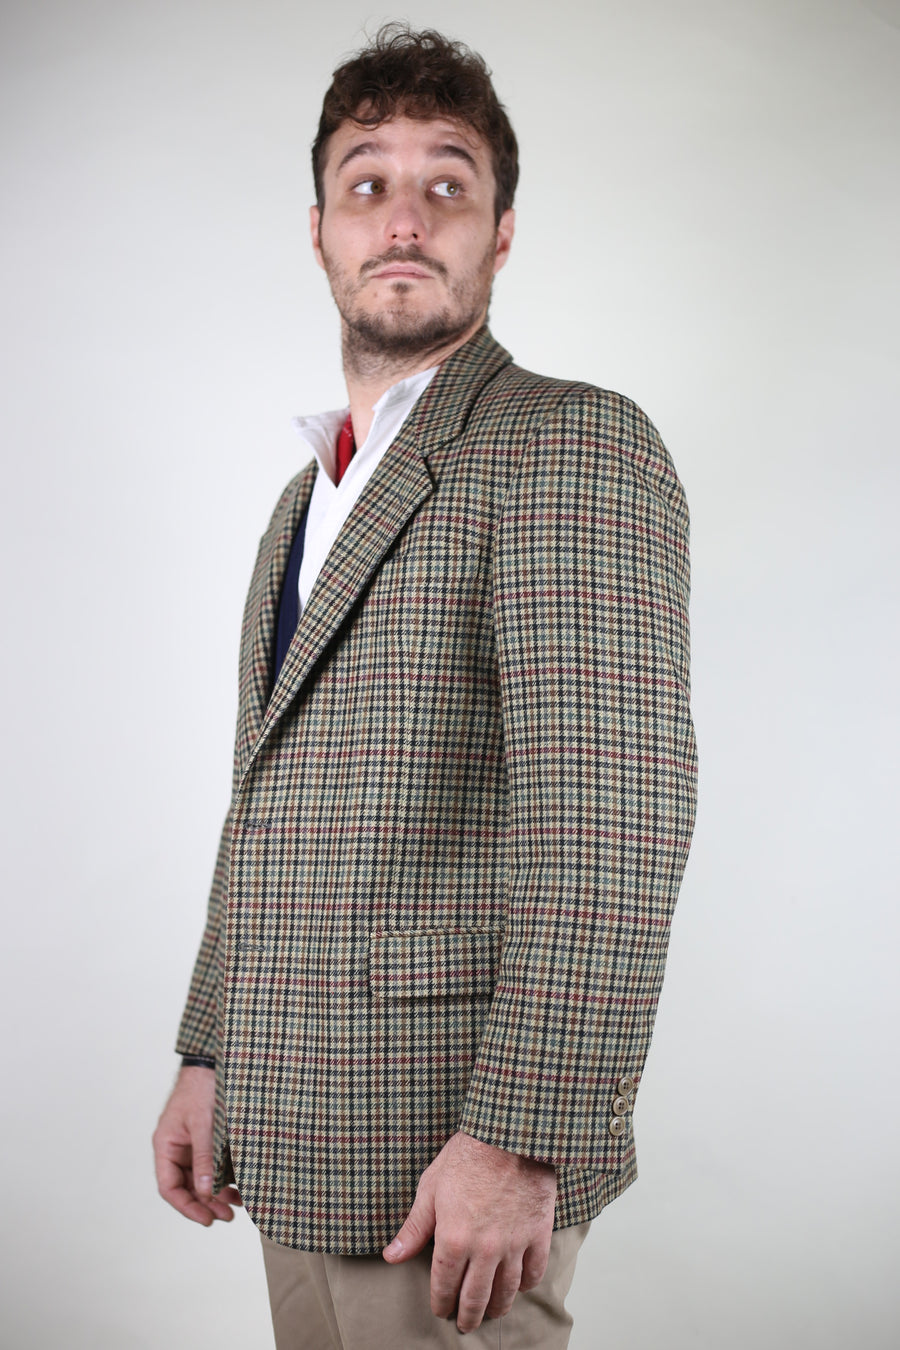 Giacca monopetto  in tweed -  L -